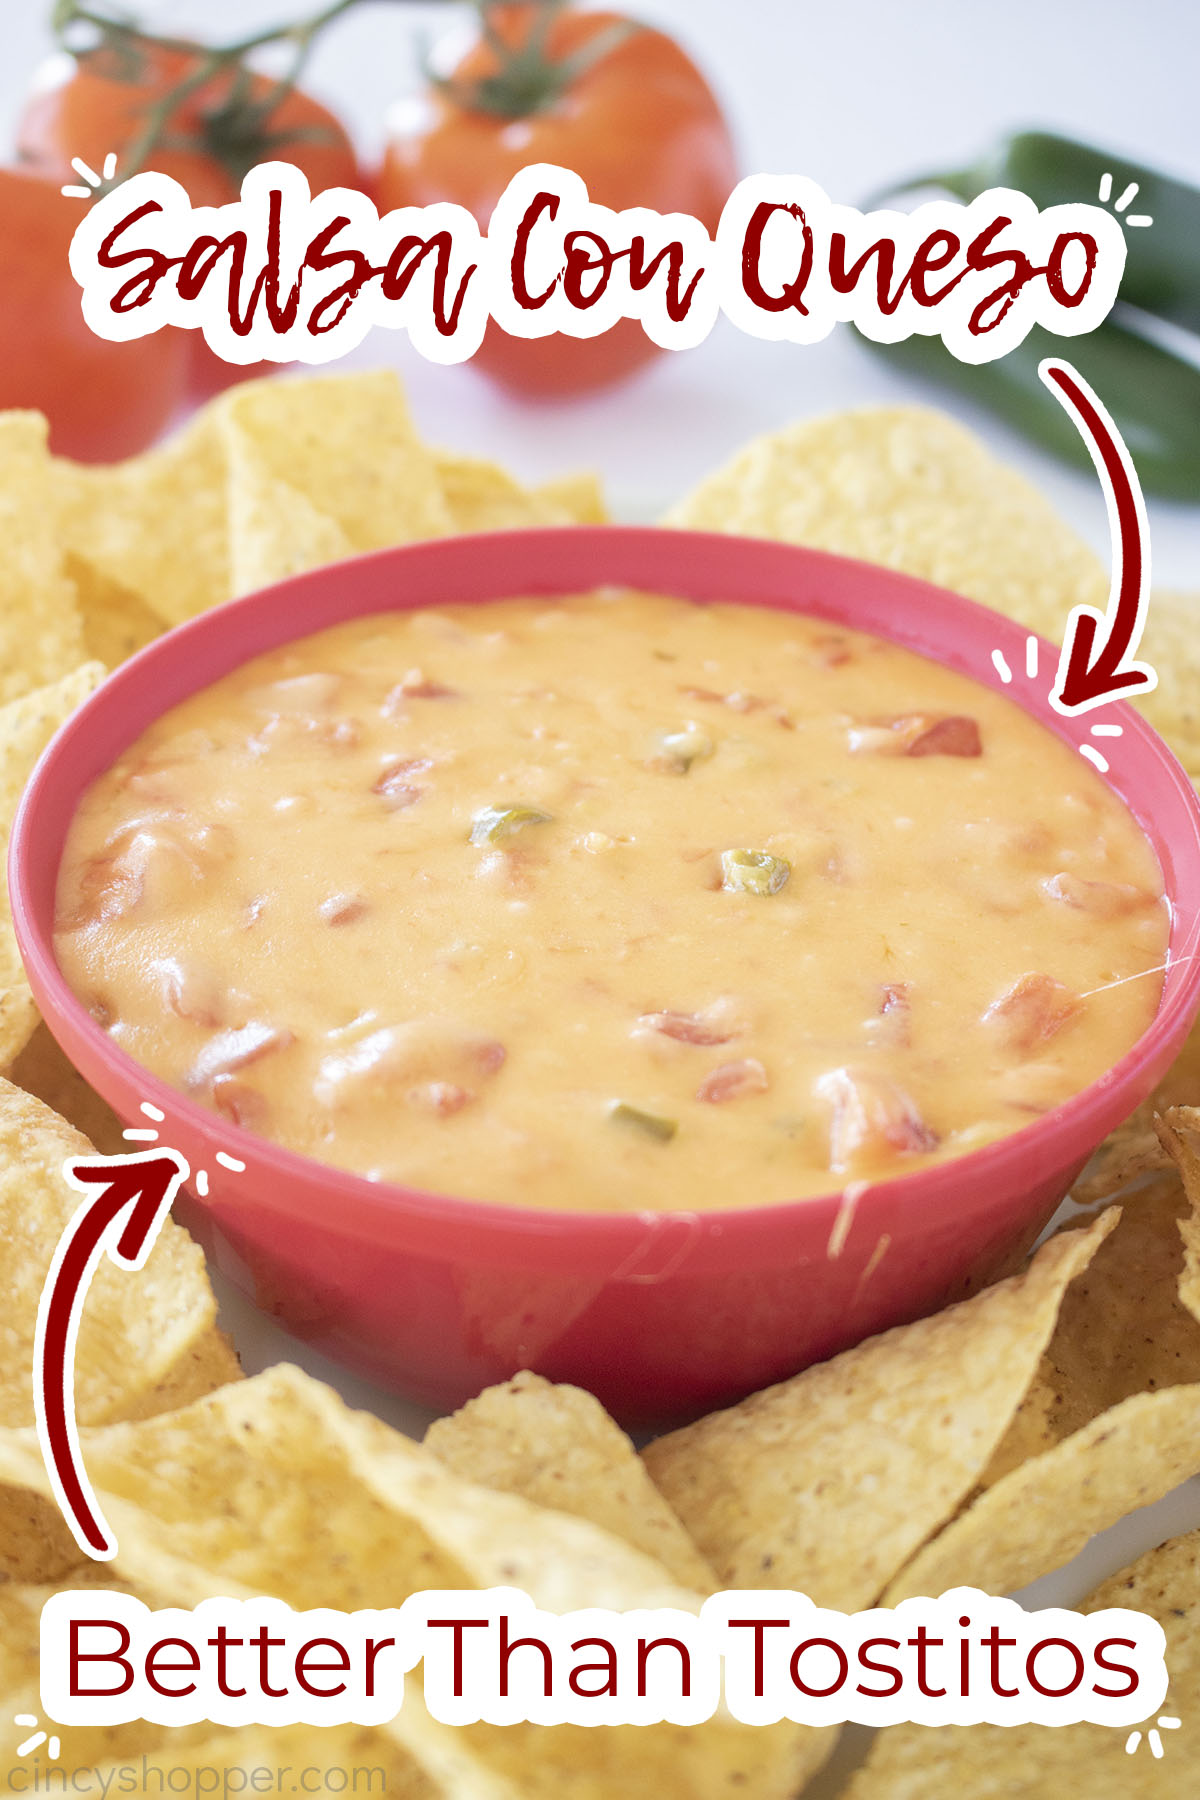 Text on image Salsa Con Queso Better than Tostitos